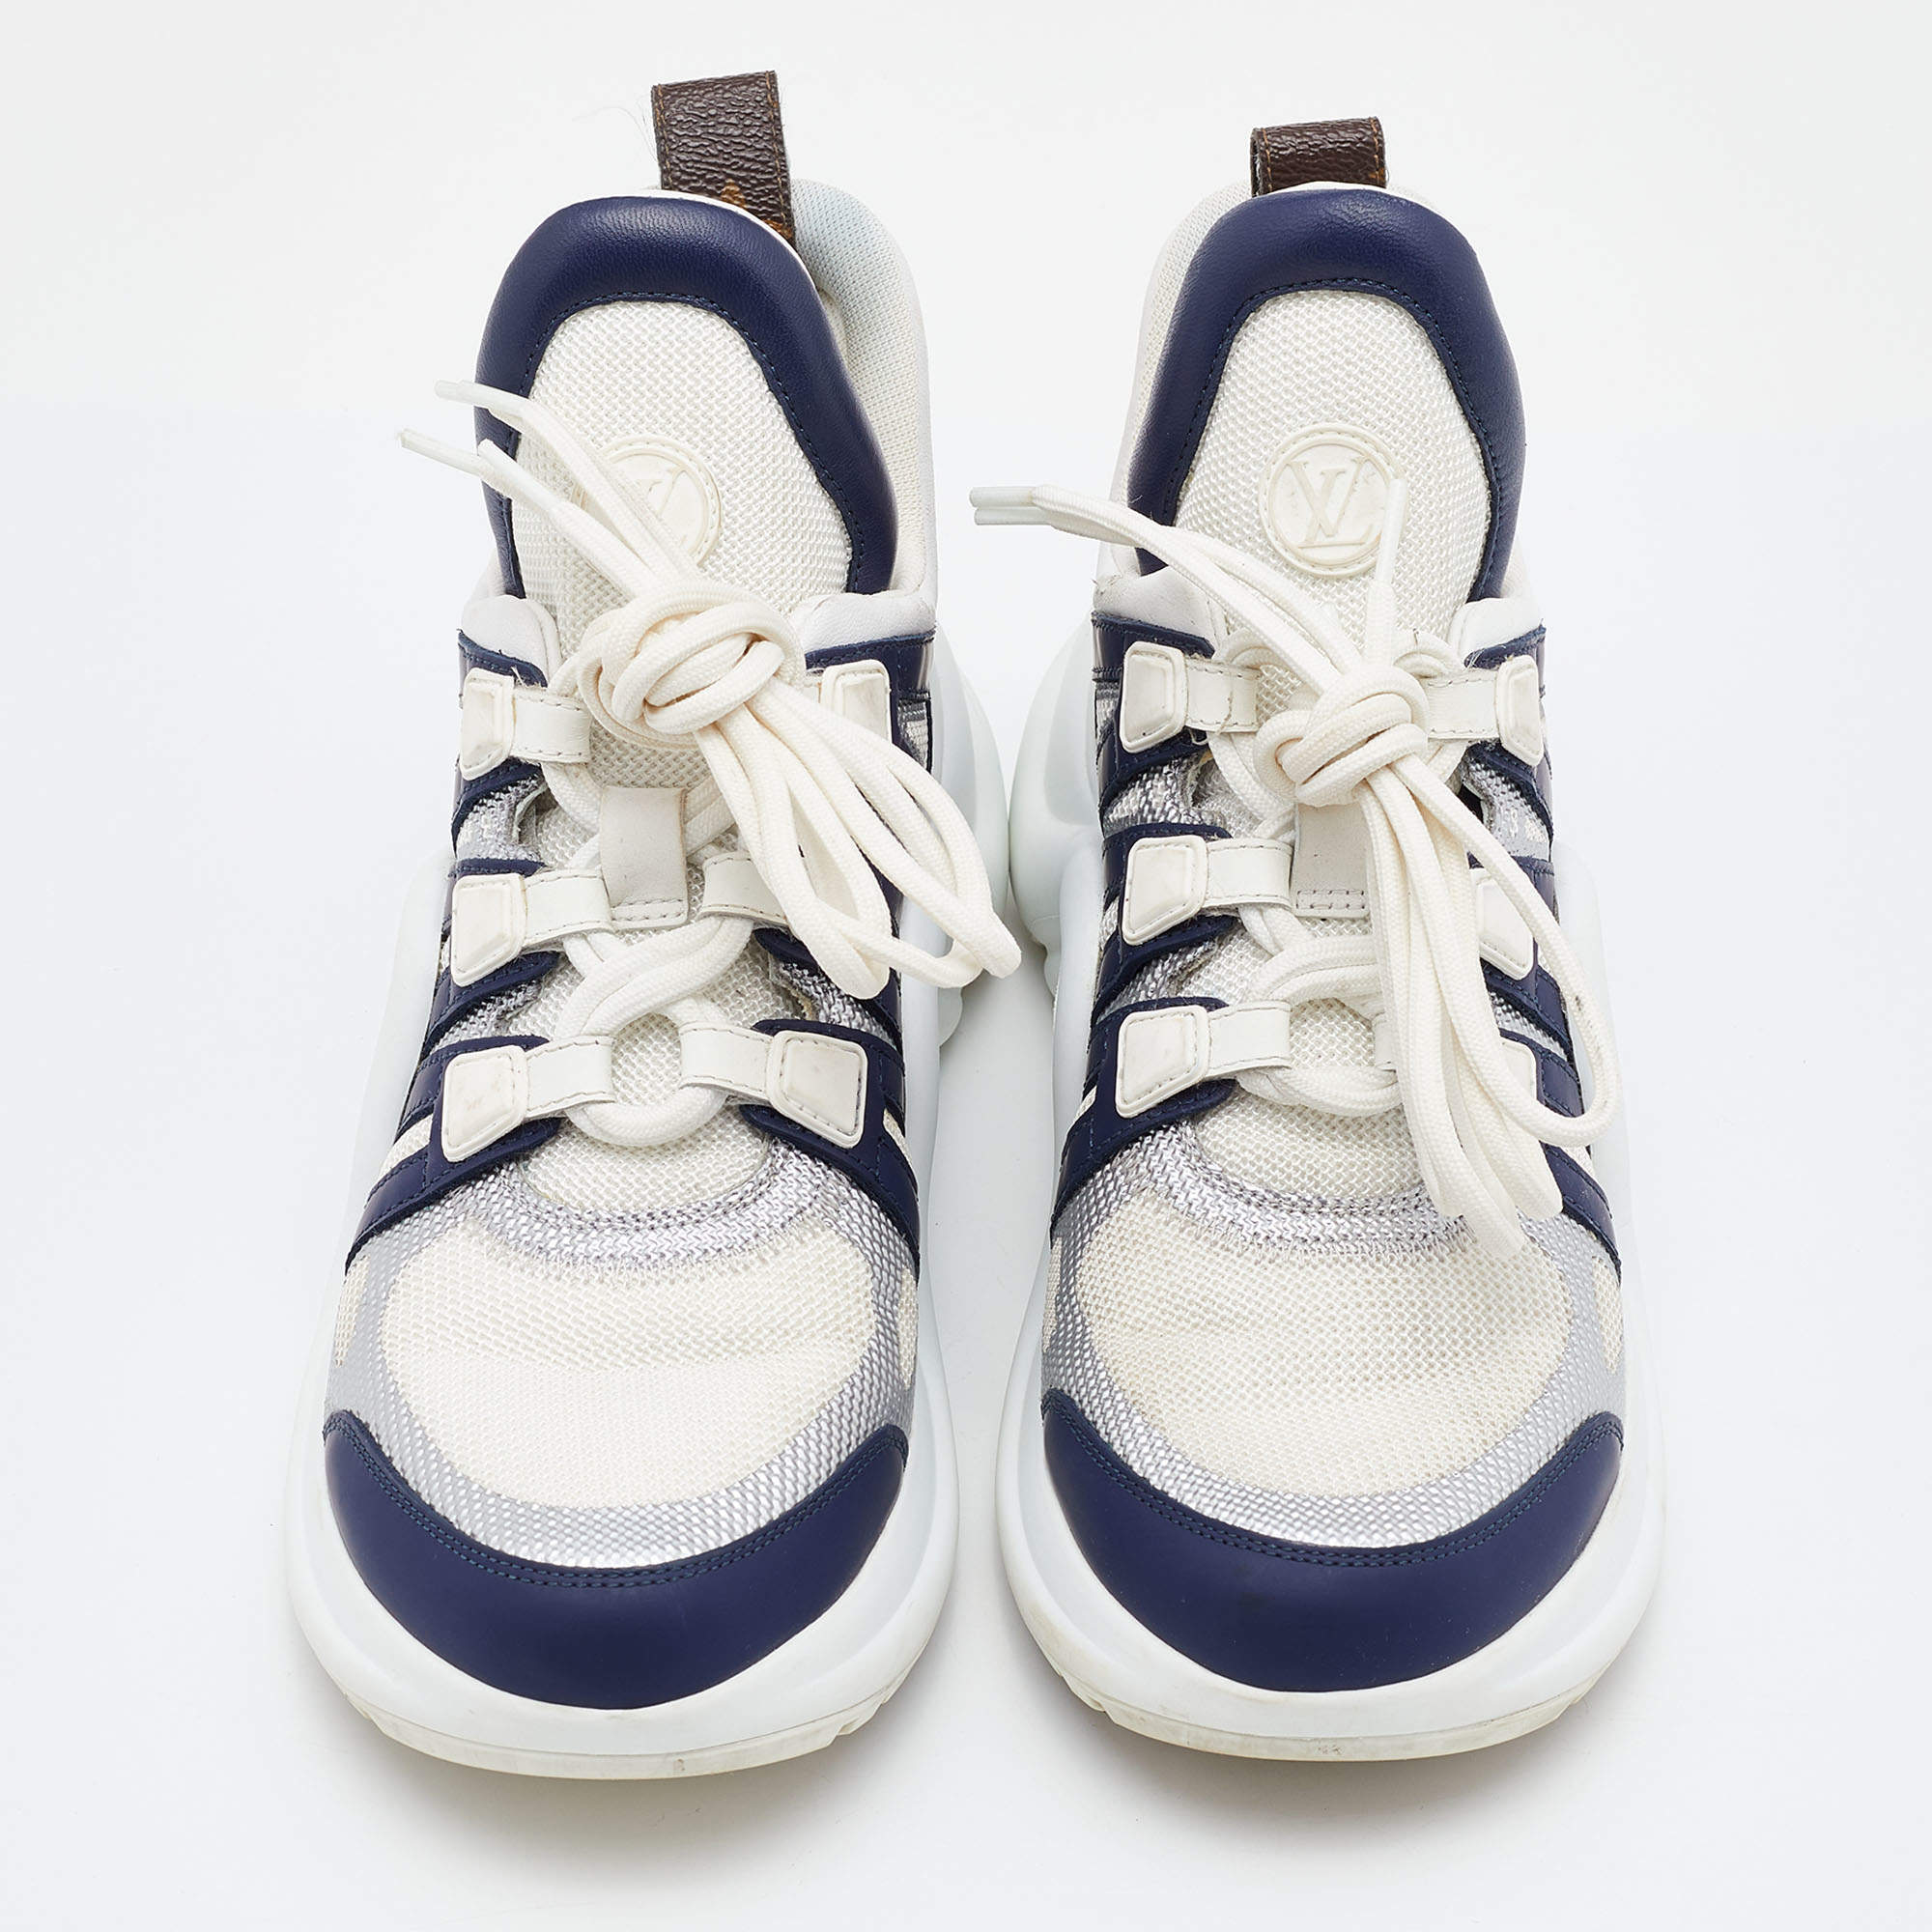 Louis Vuitton Archlight Sneakers Pink White Navy blue Light blue